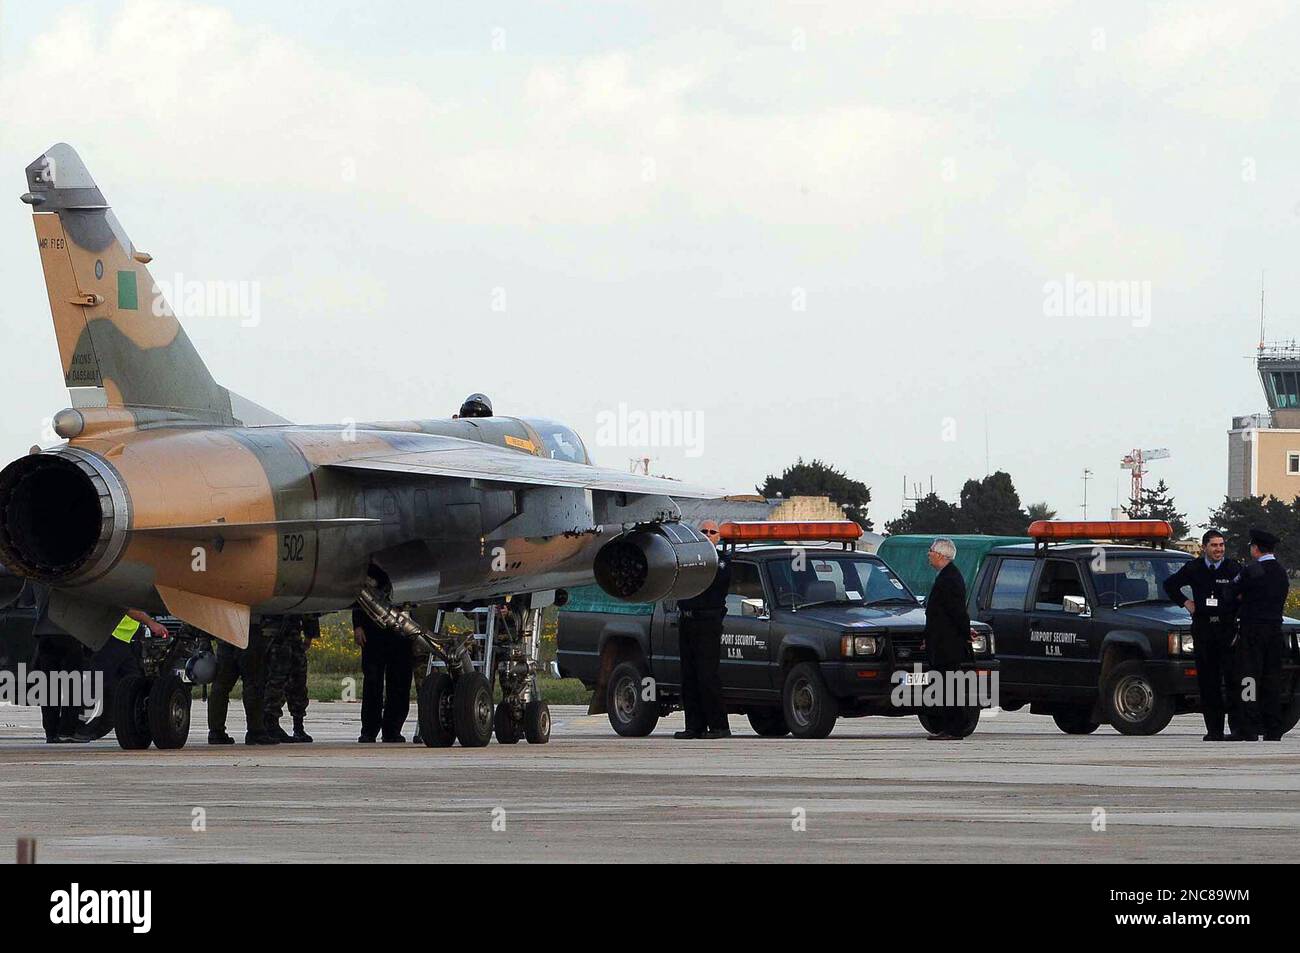 One of two Libyan Air Force Mirage jet fighters to land in Malta, is surrounded by Maltese police after it landed in Malta's International airport, Monday, Feb. 21, 2011. (AP Photo/Lino Azzopardi) Stock Photo